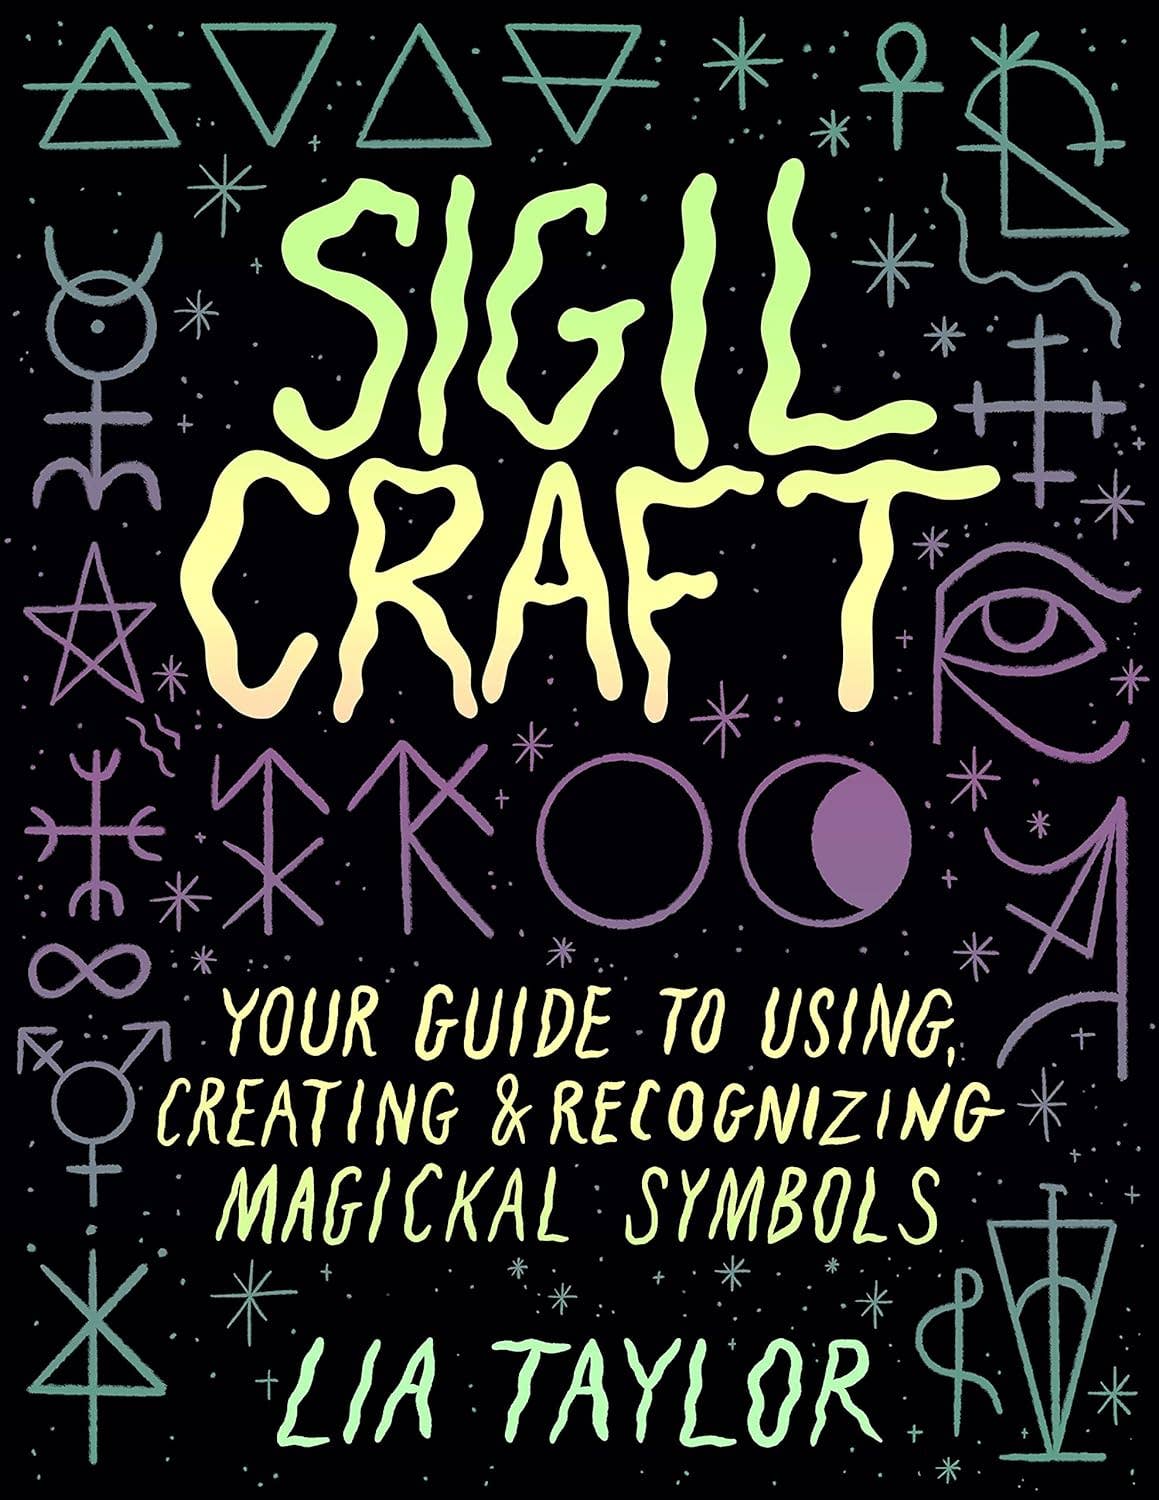 Sigil Craft: Your Guide to Using & Creating Magickal Symbols